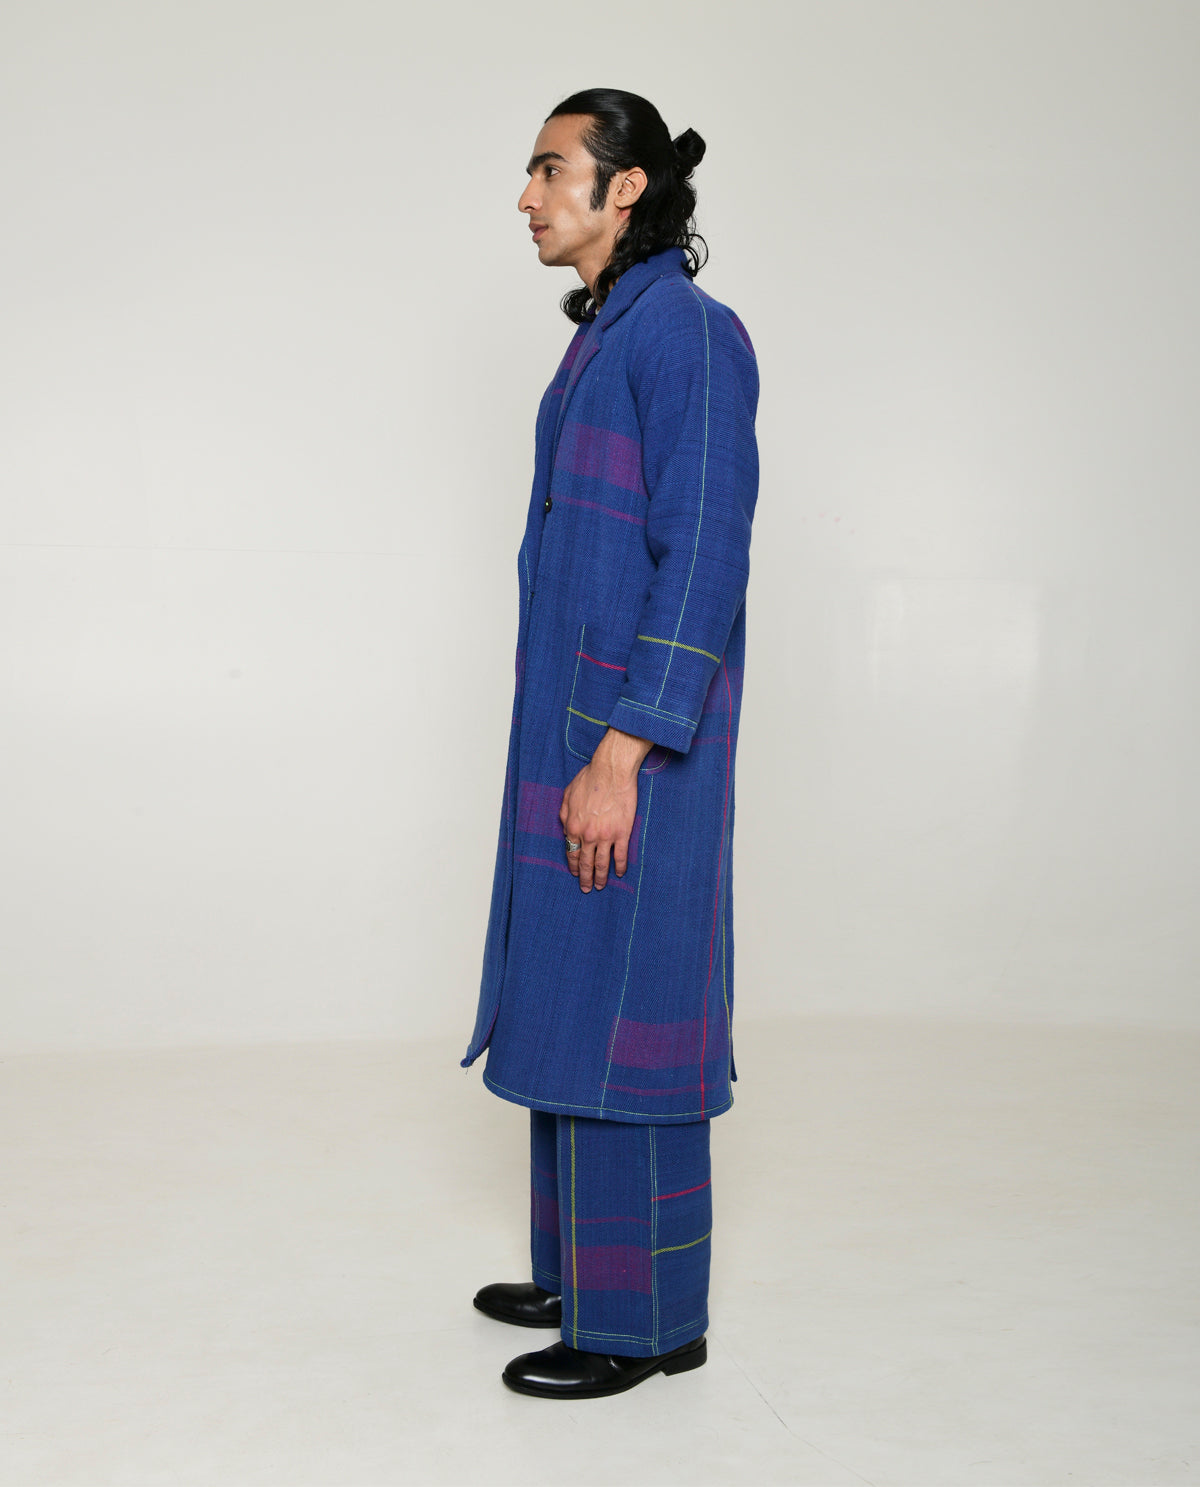 Recycled Blue Striped Cotton Trench Coat by Rias Jaipur with 100% Cotton, Blue, Casual wear, Multicolor, Natural, Overlays, RE 2.O, RE 2.O by Rias Jaipur, Regular, Stripes, Unisex, Womenswear at Kamakhyaa for sustainable fashion